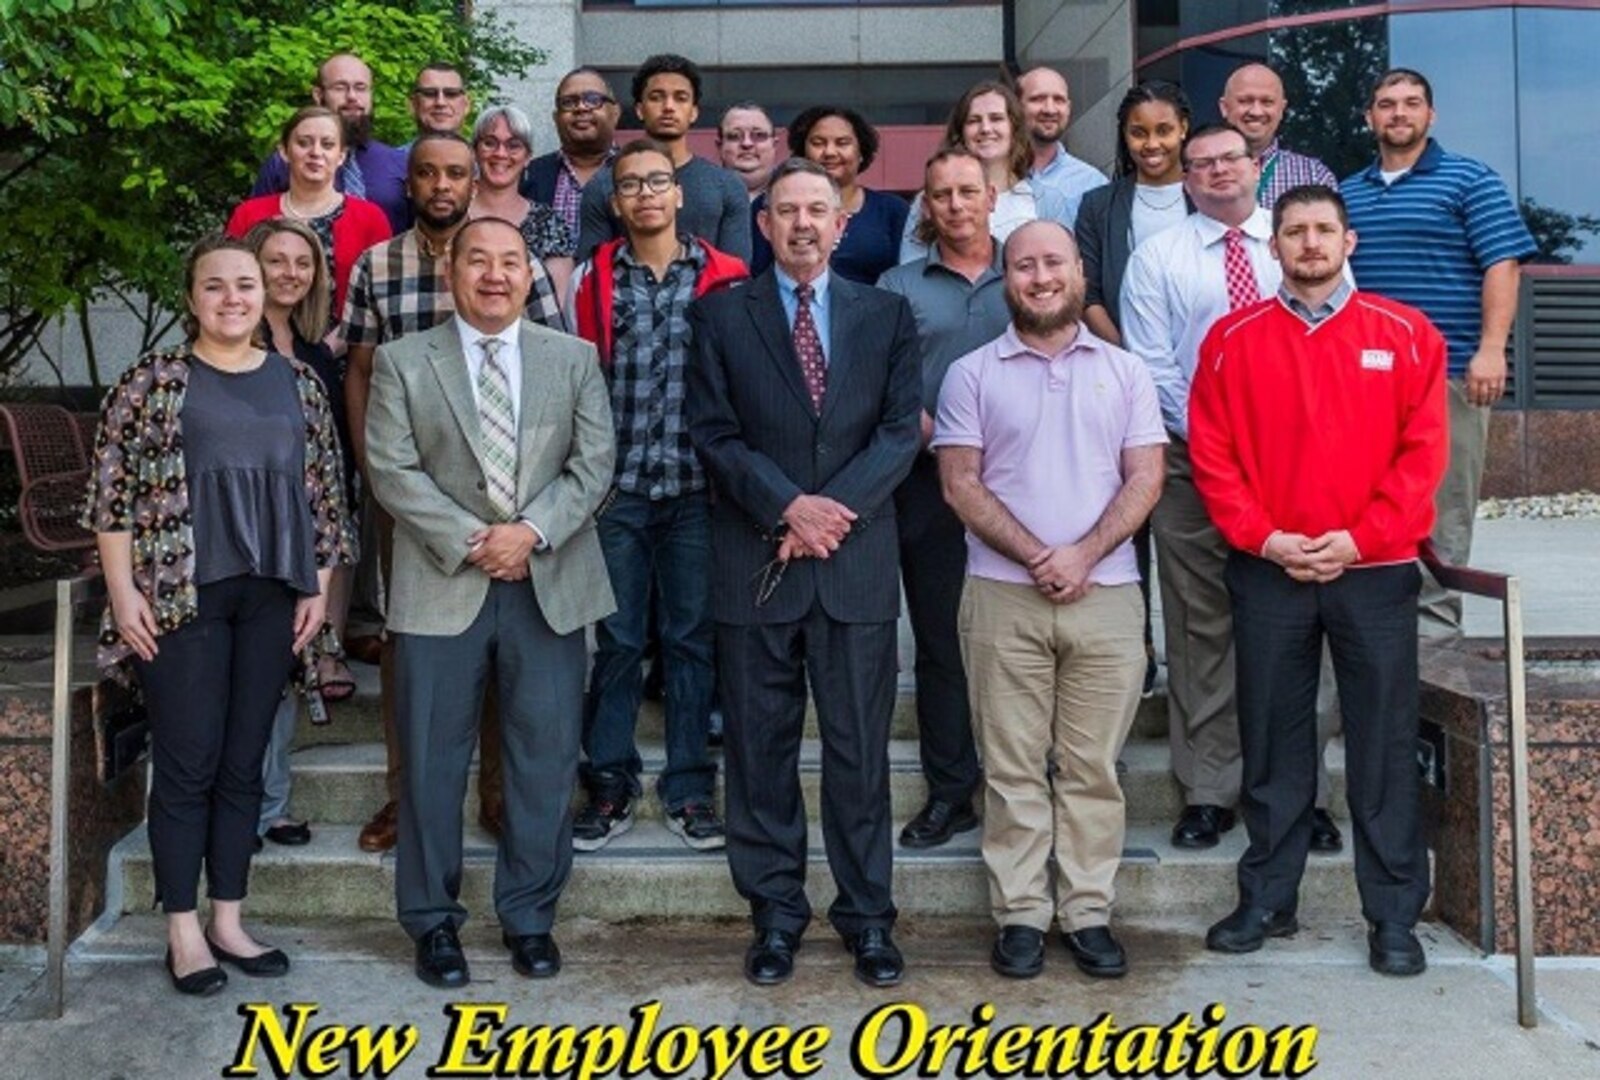 Group photo of 22 new employees with Mr. Warren for the May 2019 NEO.